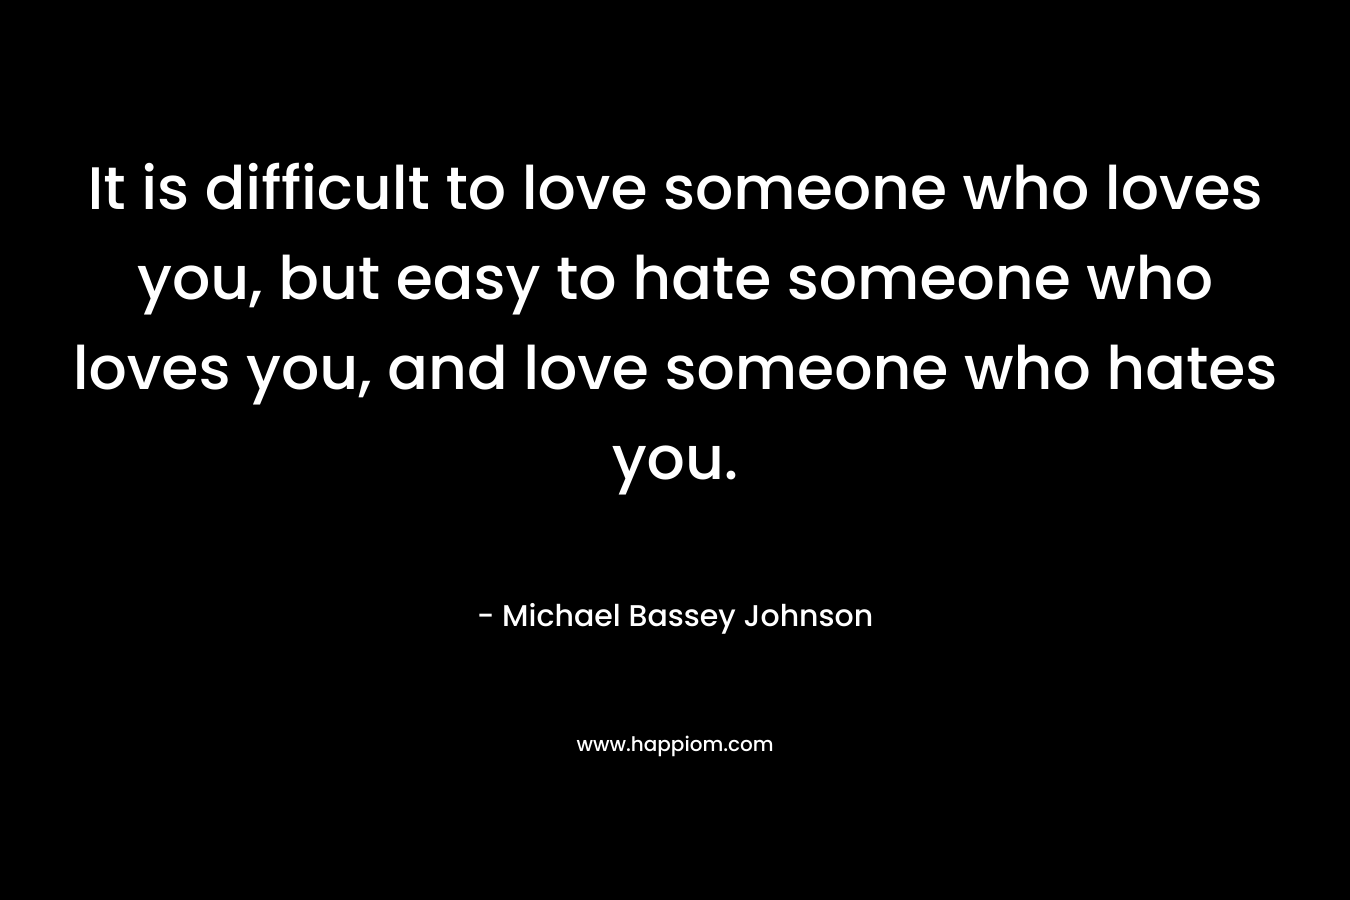 It is difficult to love someone who loves you, but easy to hate someone who loves you, and love someone who hates you.